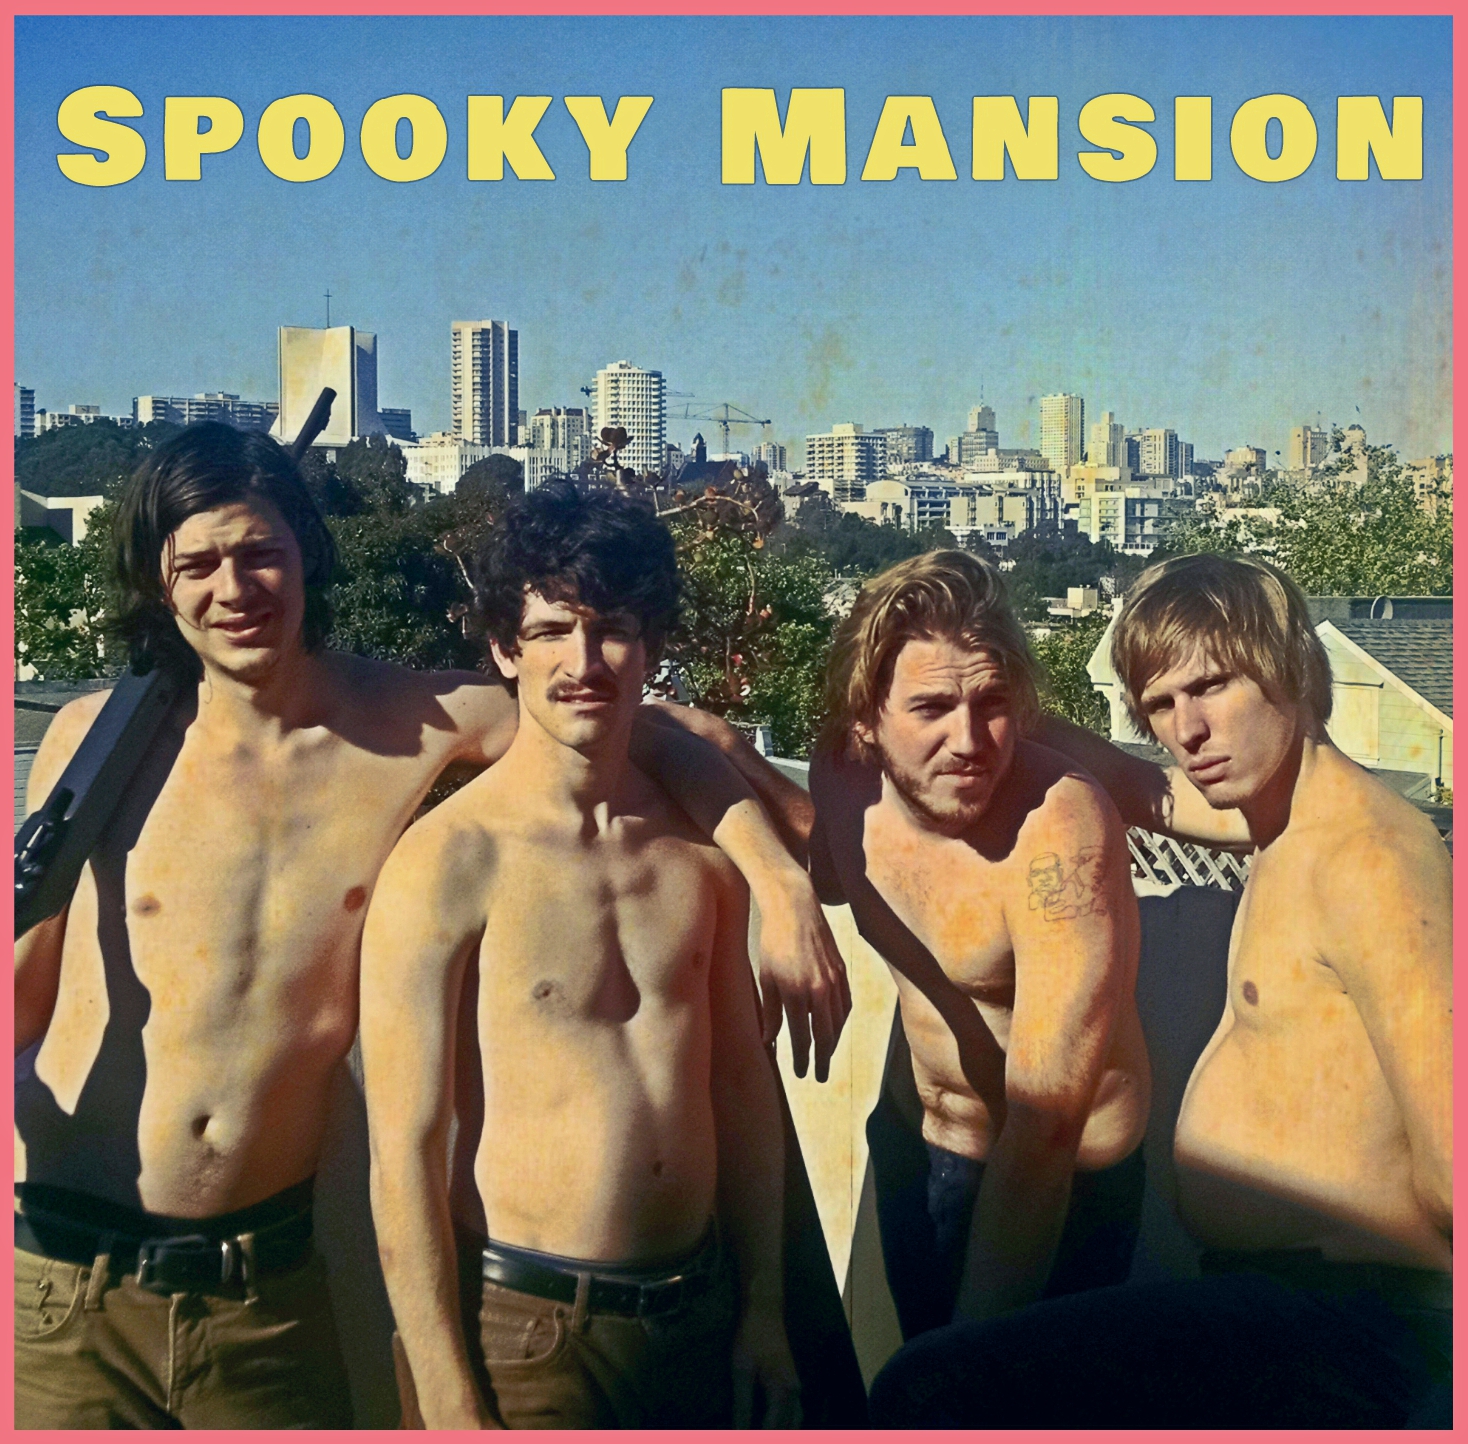 Spooky Mansion release ‘Feel That Blood’ music video